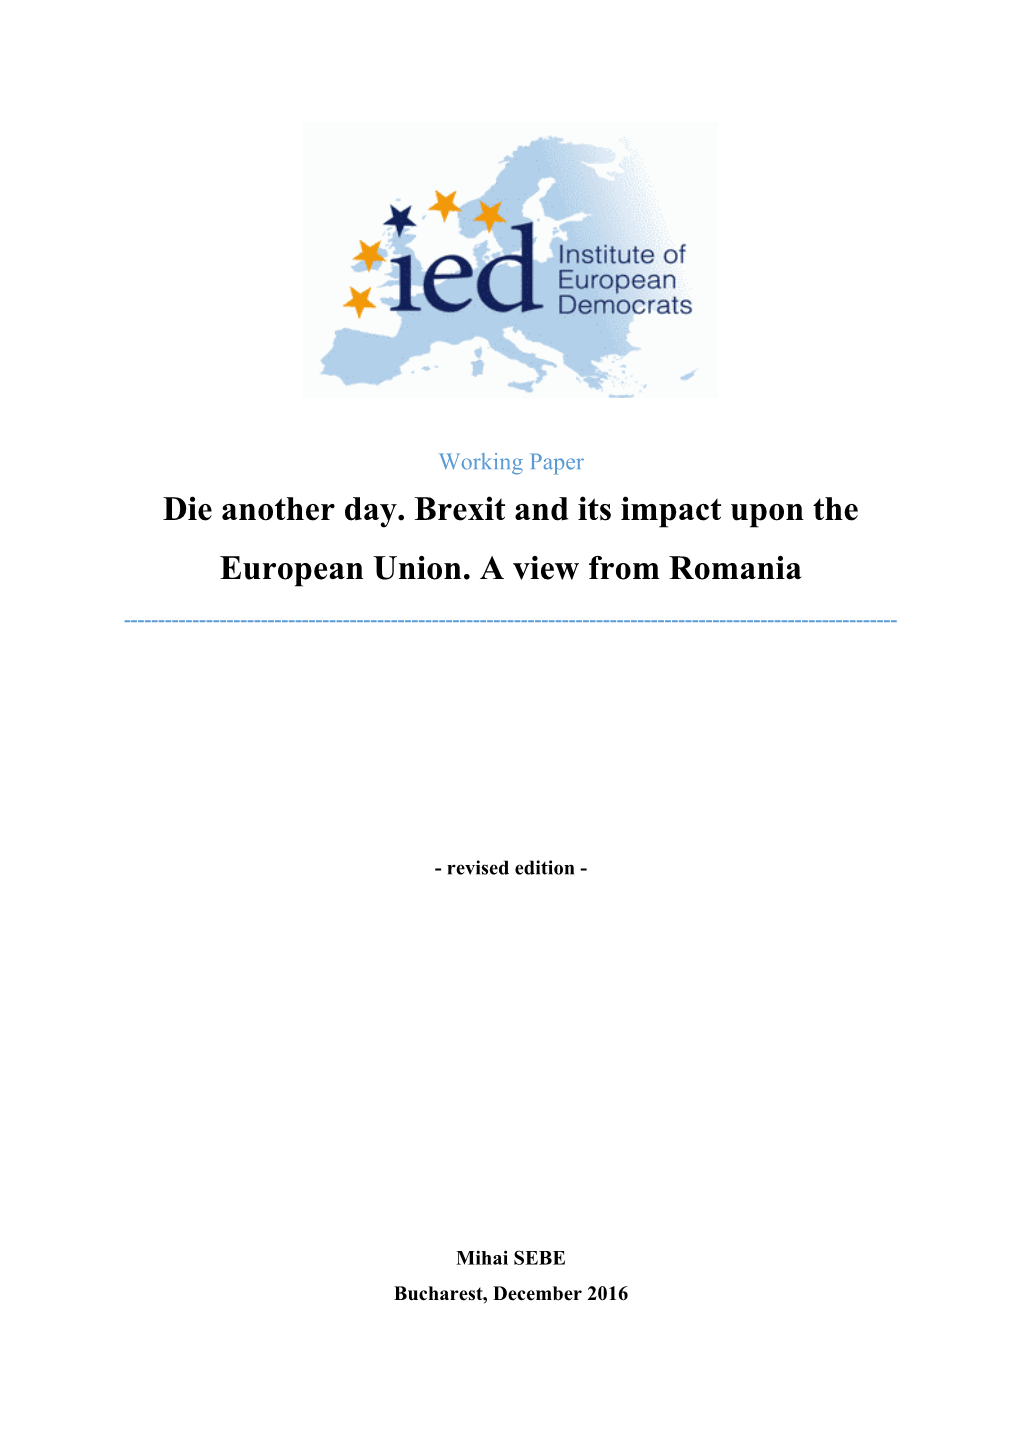 Die Another Day. Brexit and Its Impact Upon the European Union. a View from Romania